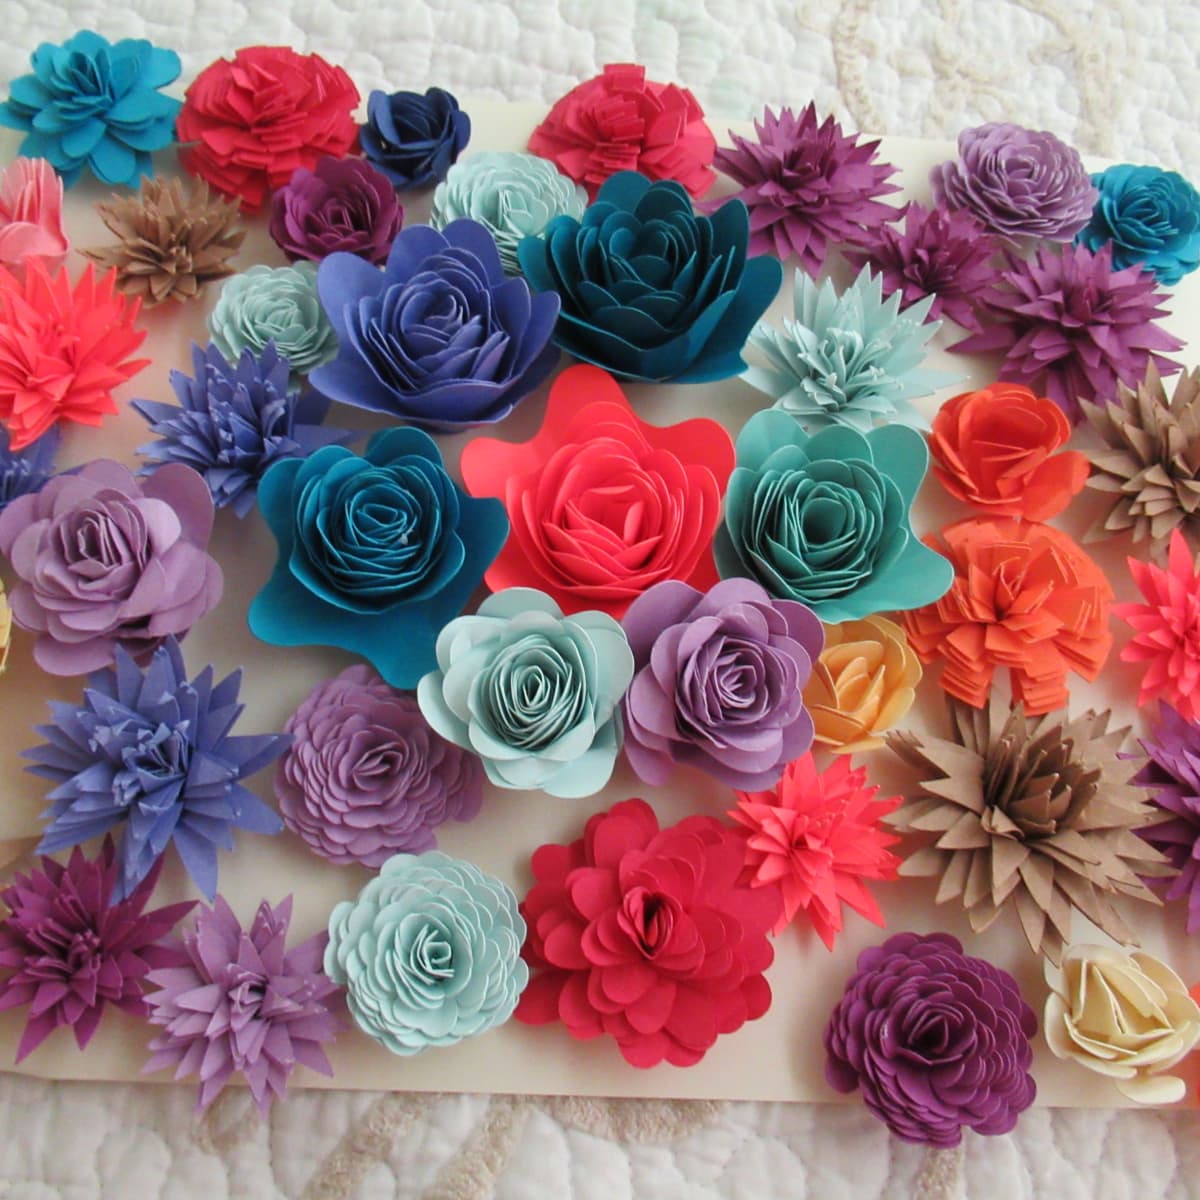 Tissue Paper Fantasy Flowers : 4 Steps (with Pictures) - Instructables